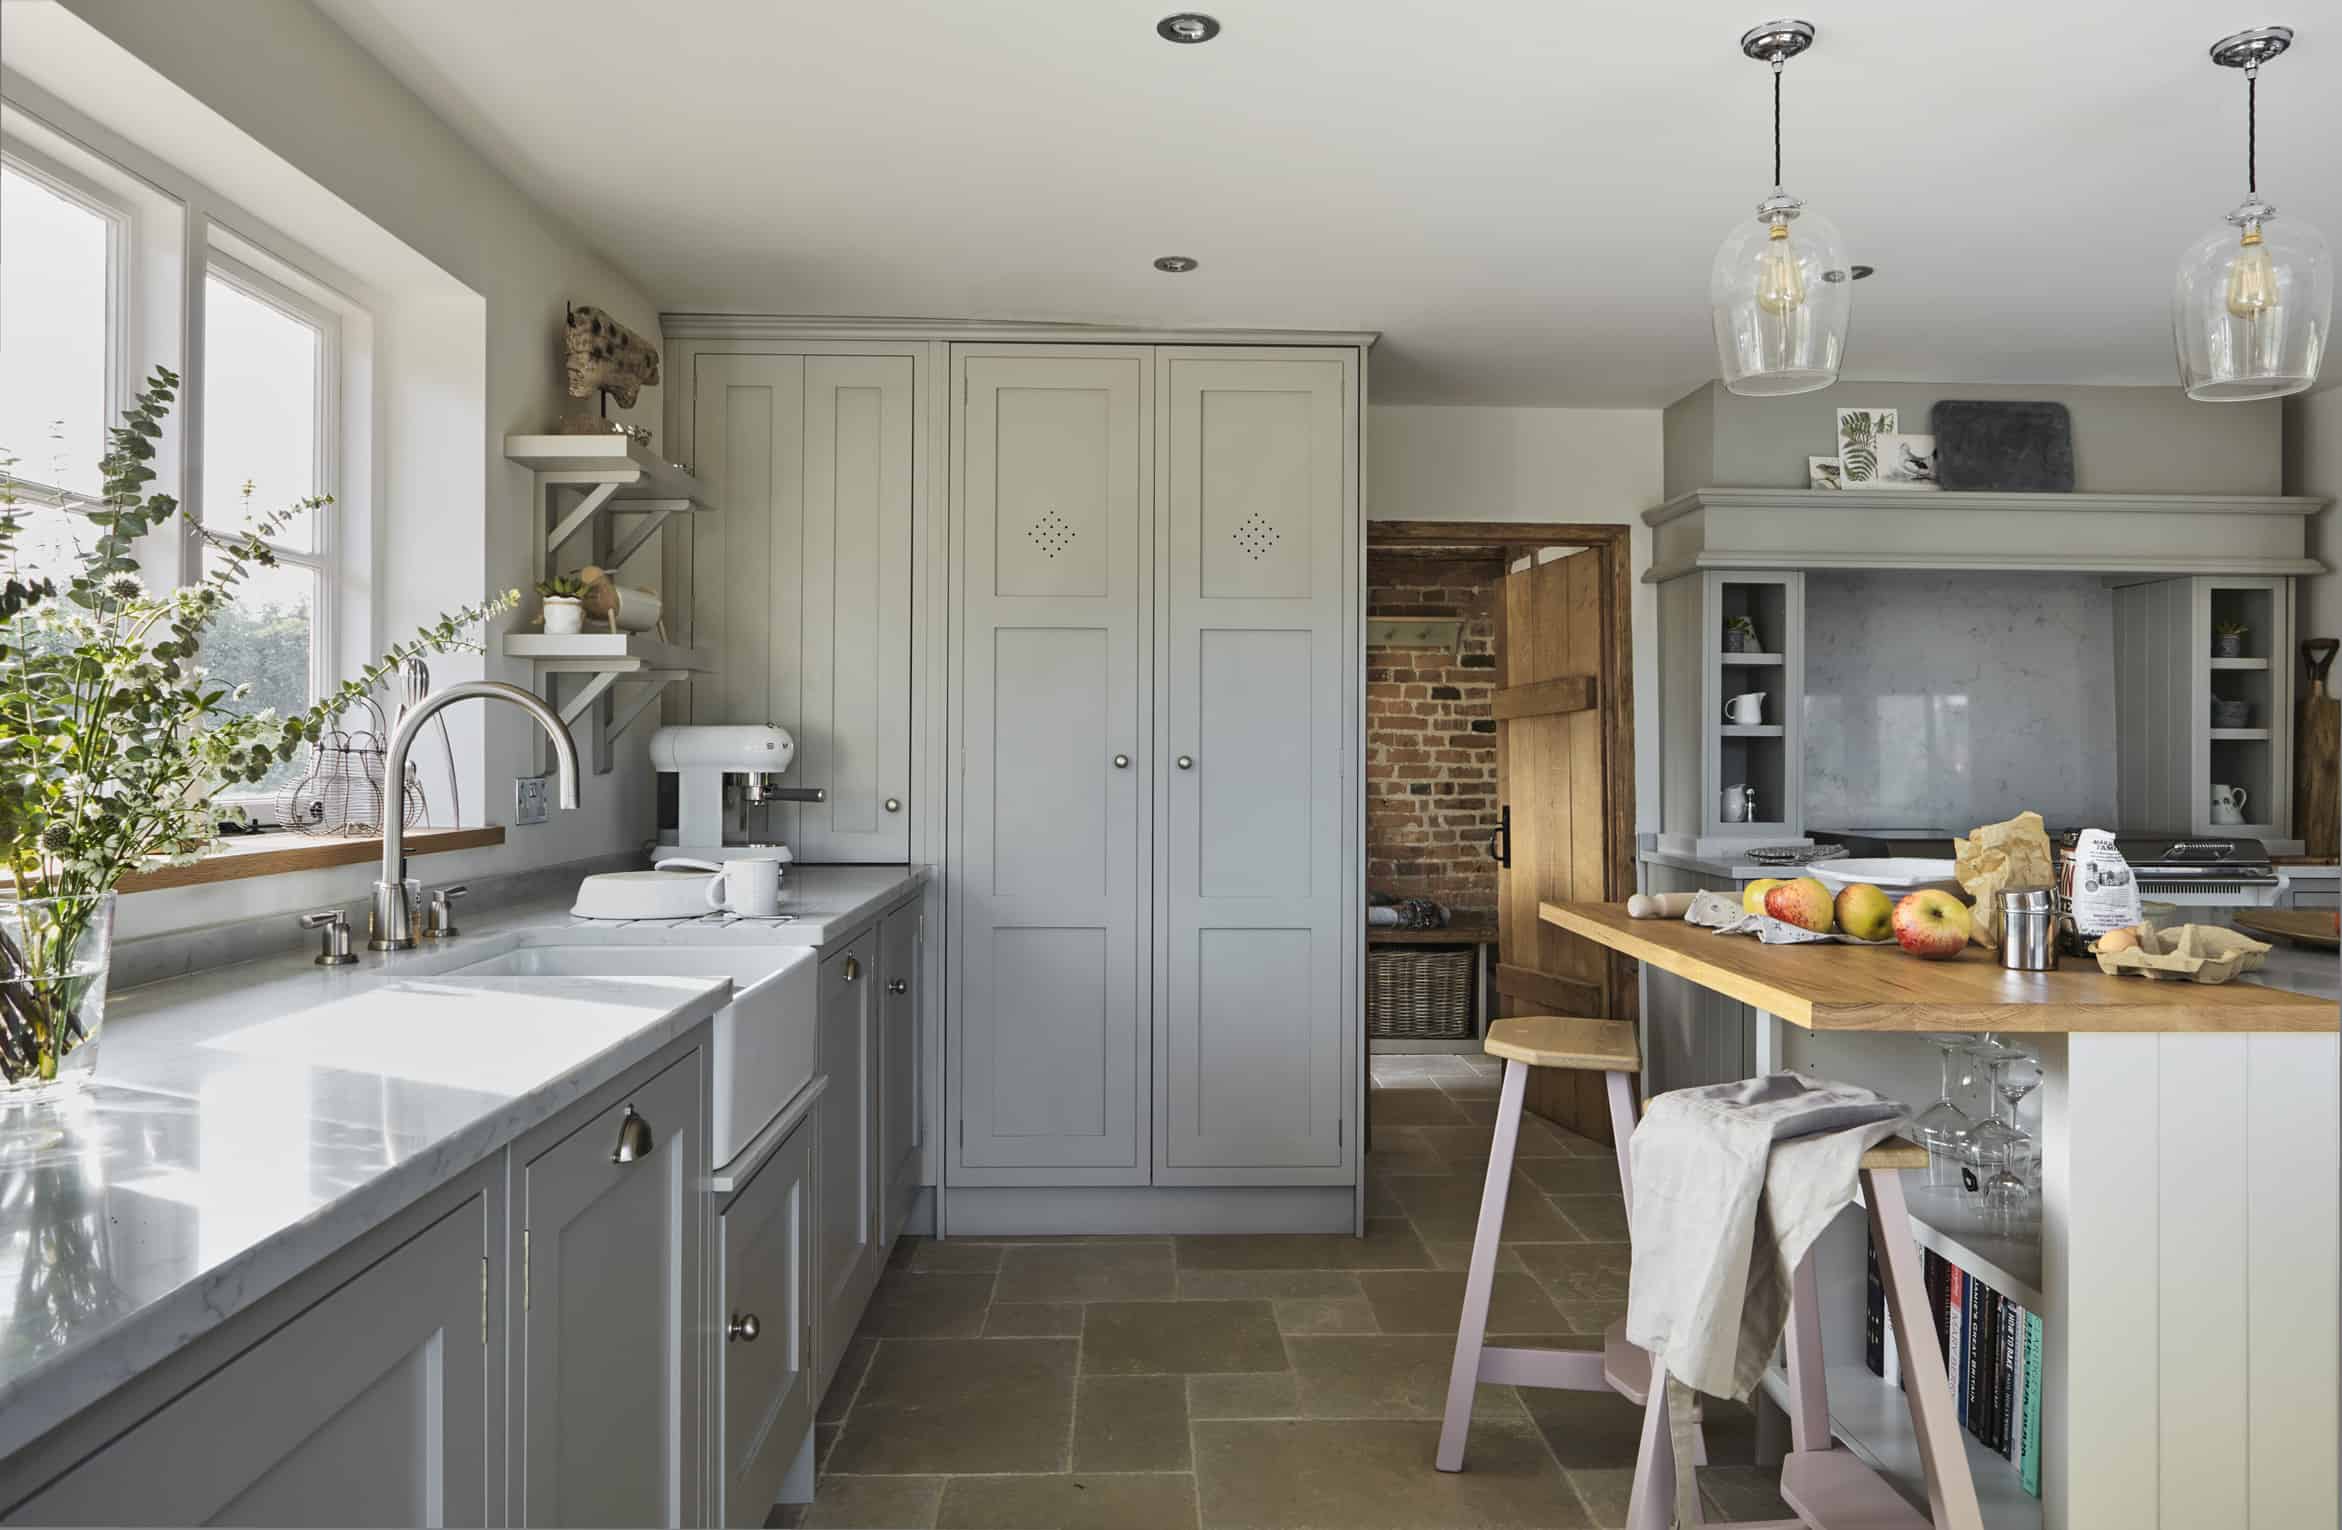 John Lewis of Hungerford luxury country style kitchen in grey with stone flooring